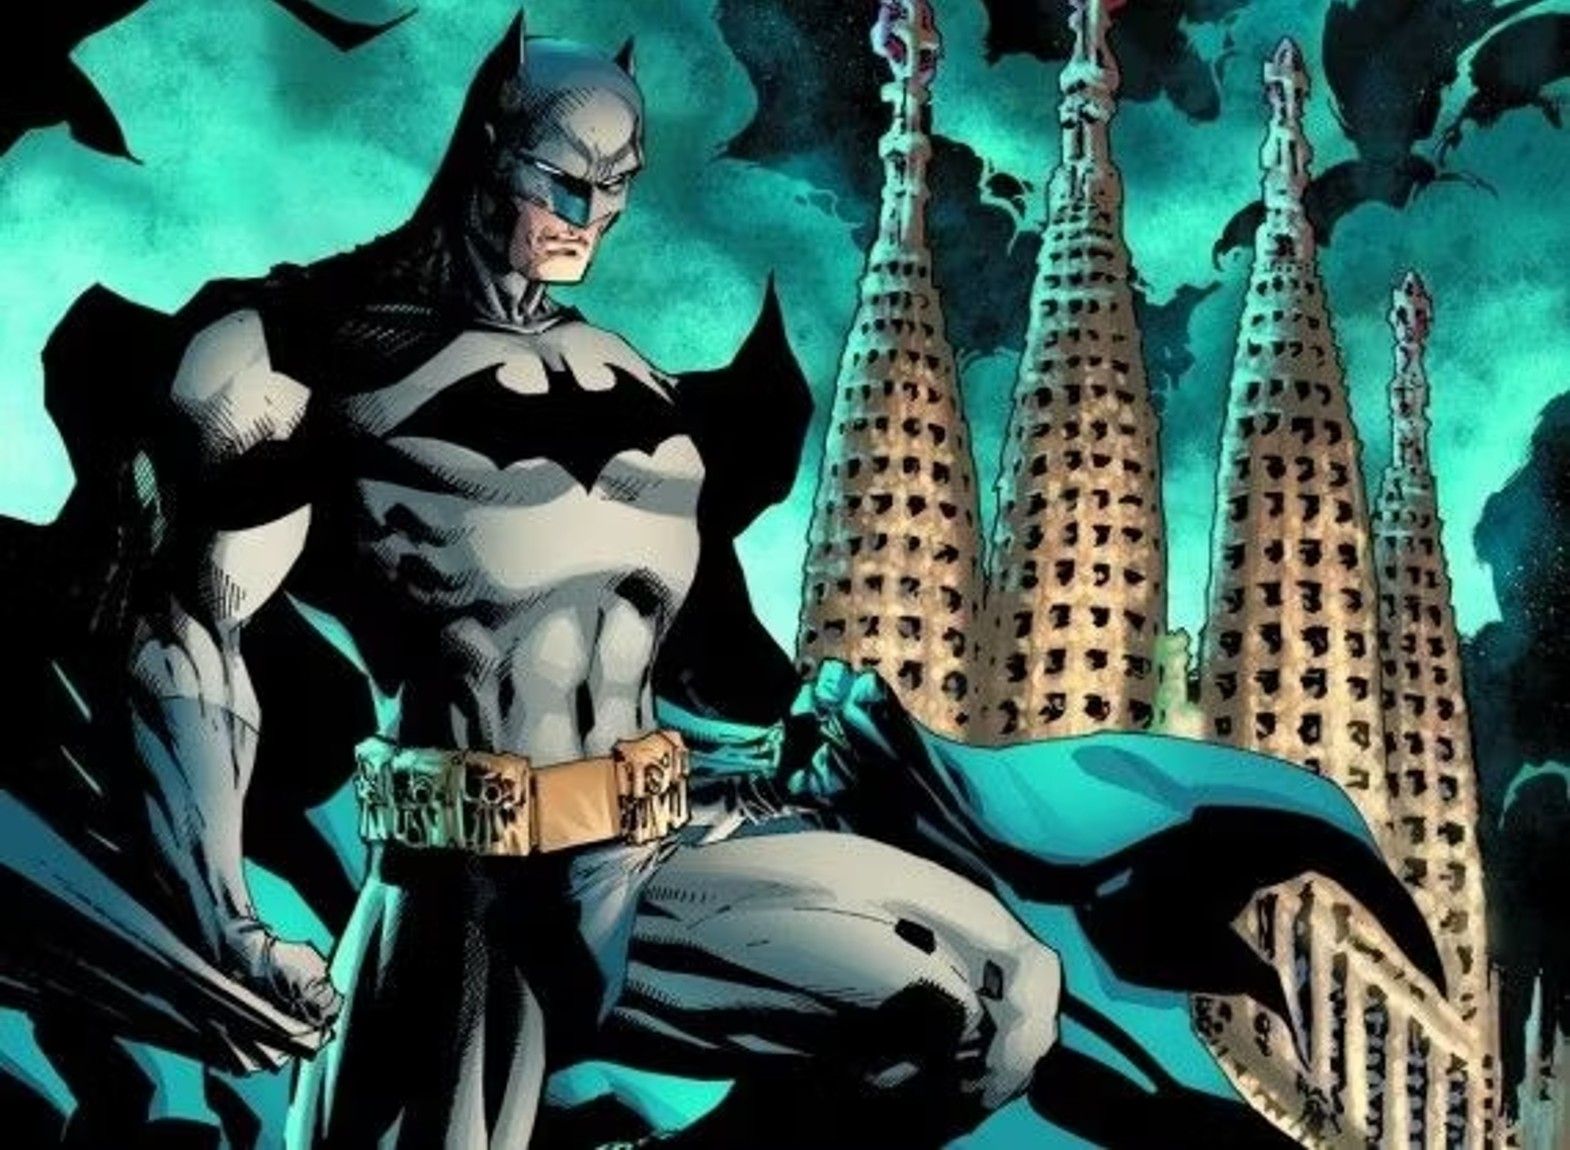 Jim Lee's Batman against the backdrop of a green sky and Gotham skyscrapers